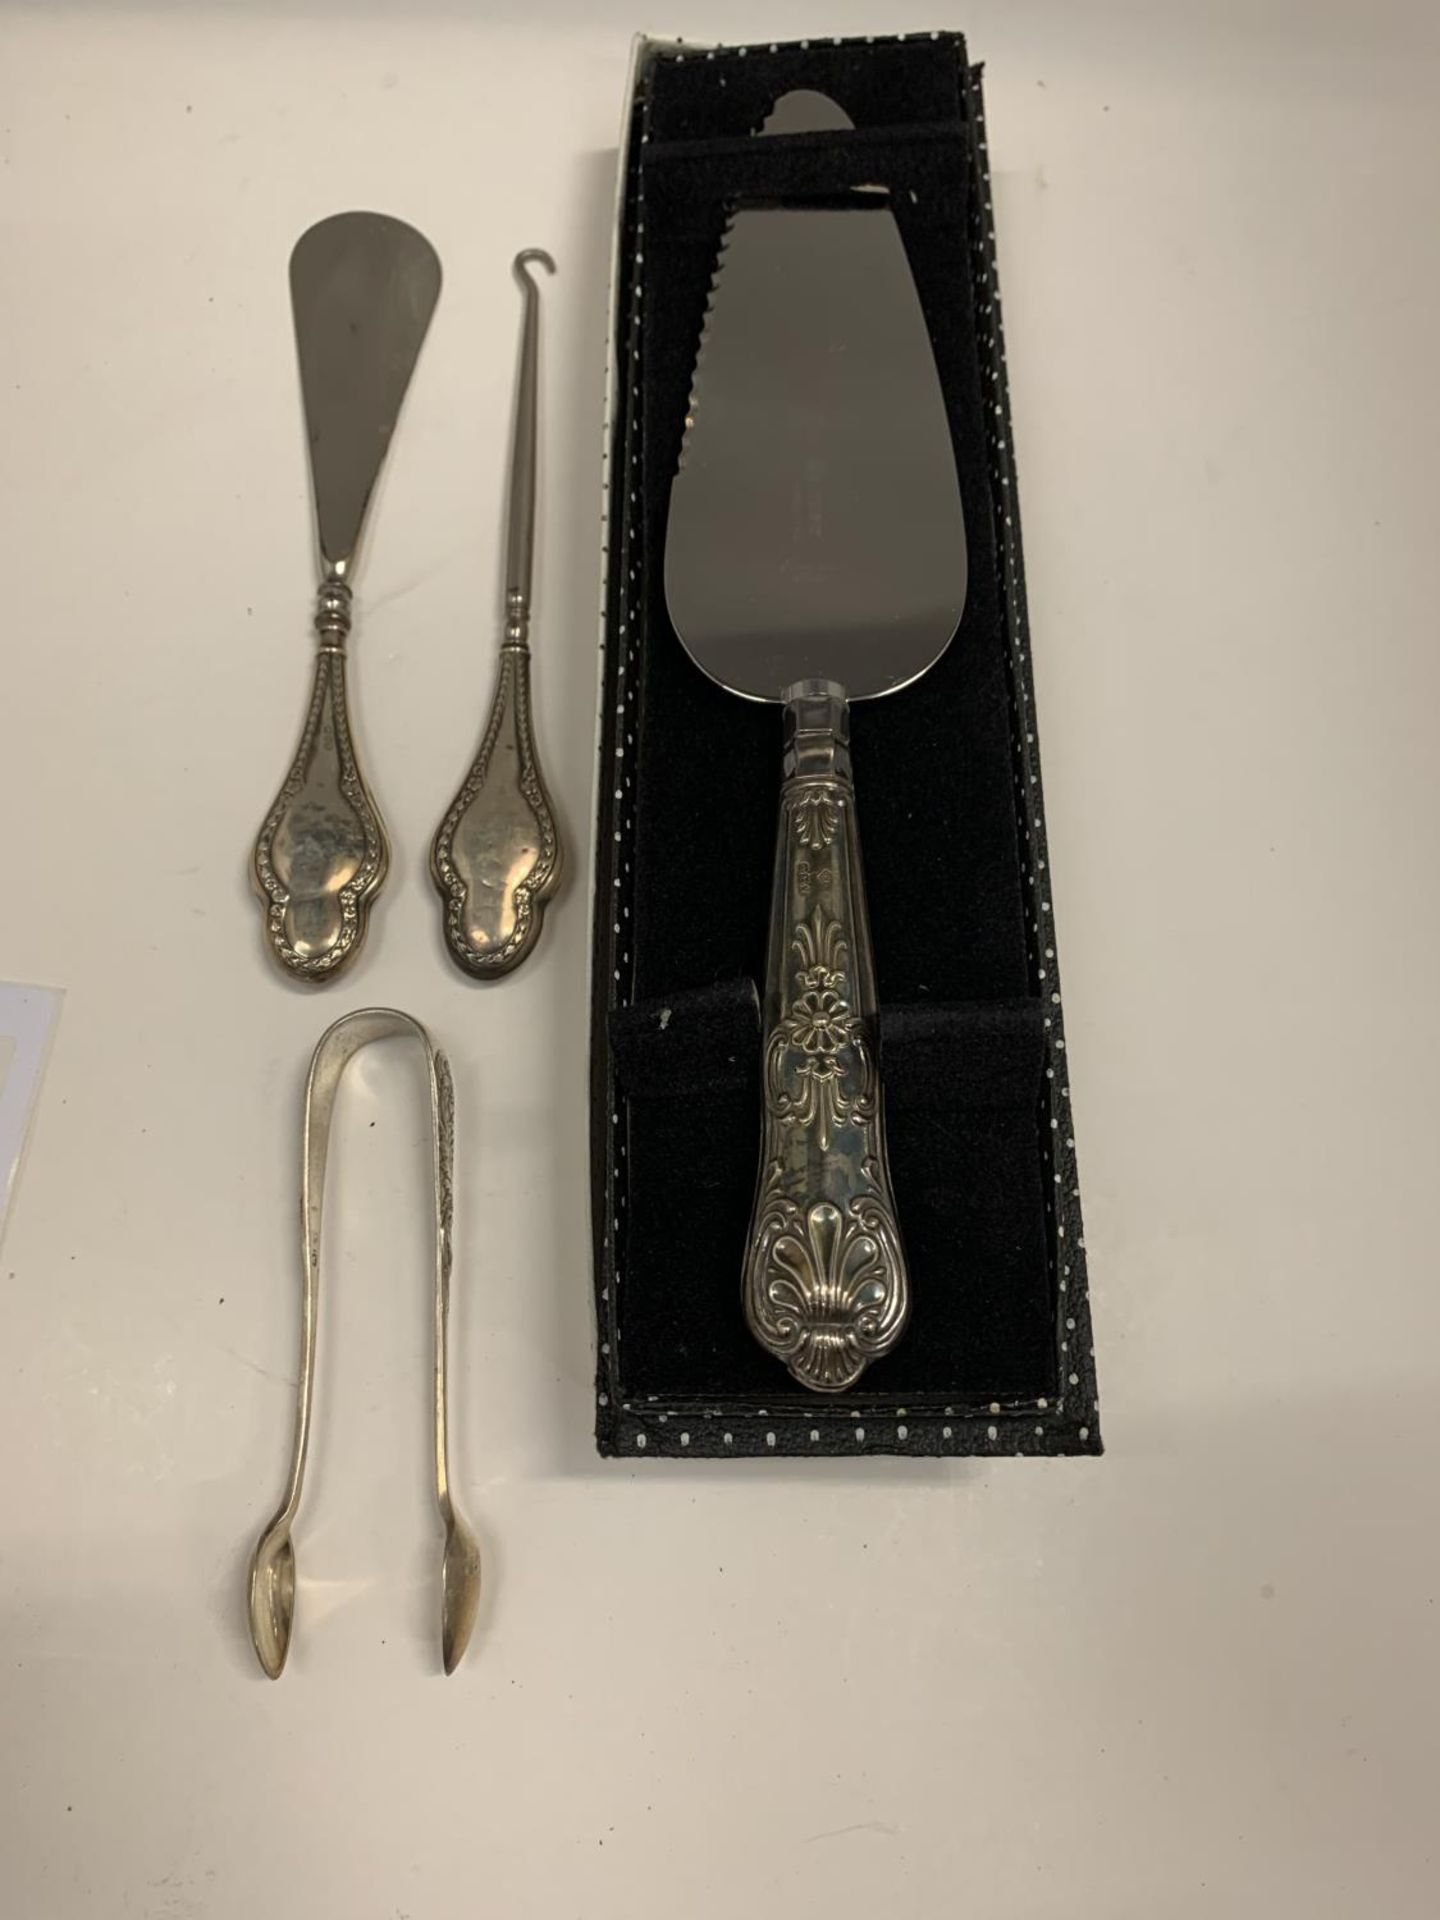 FOUR HALLMARKED ITEMS OF SILVER TO INCLUDE A HANDLED CAKE SLICE IN A BOX, A BUTTON HOOK AND SHOE